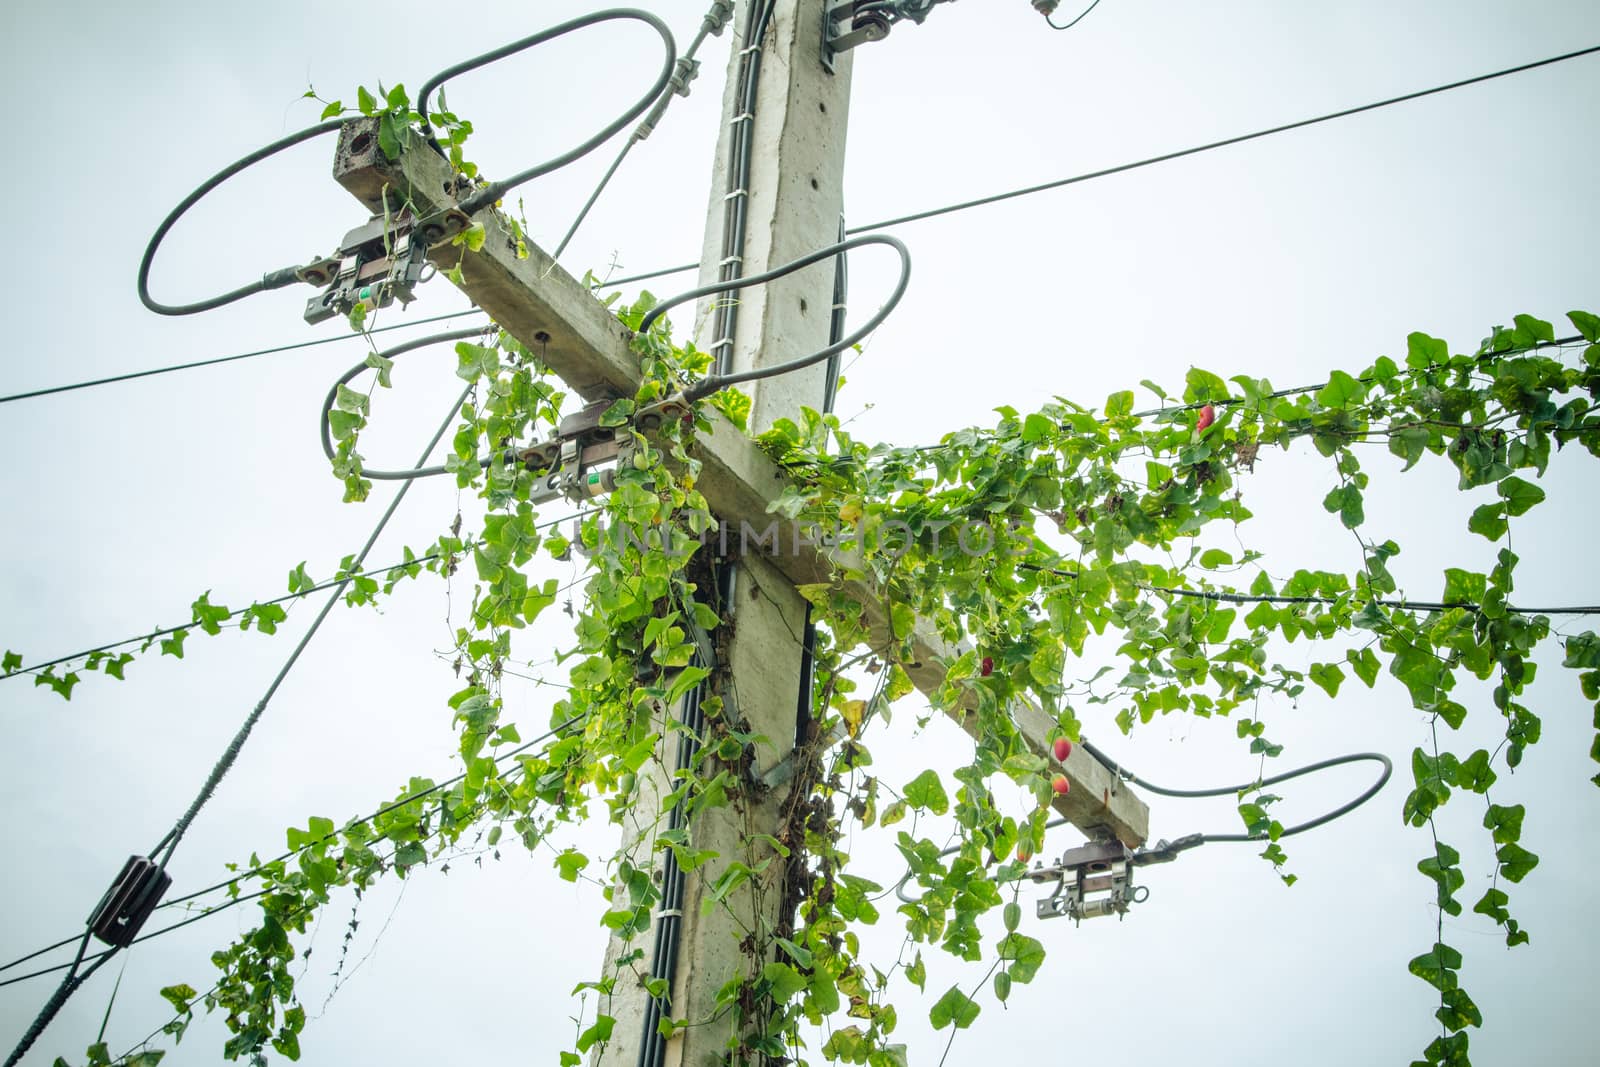 Vines on electric poles and power lines.